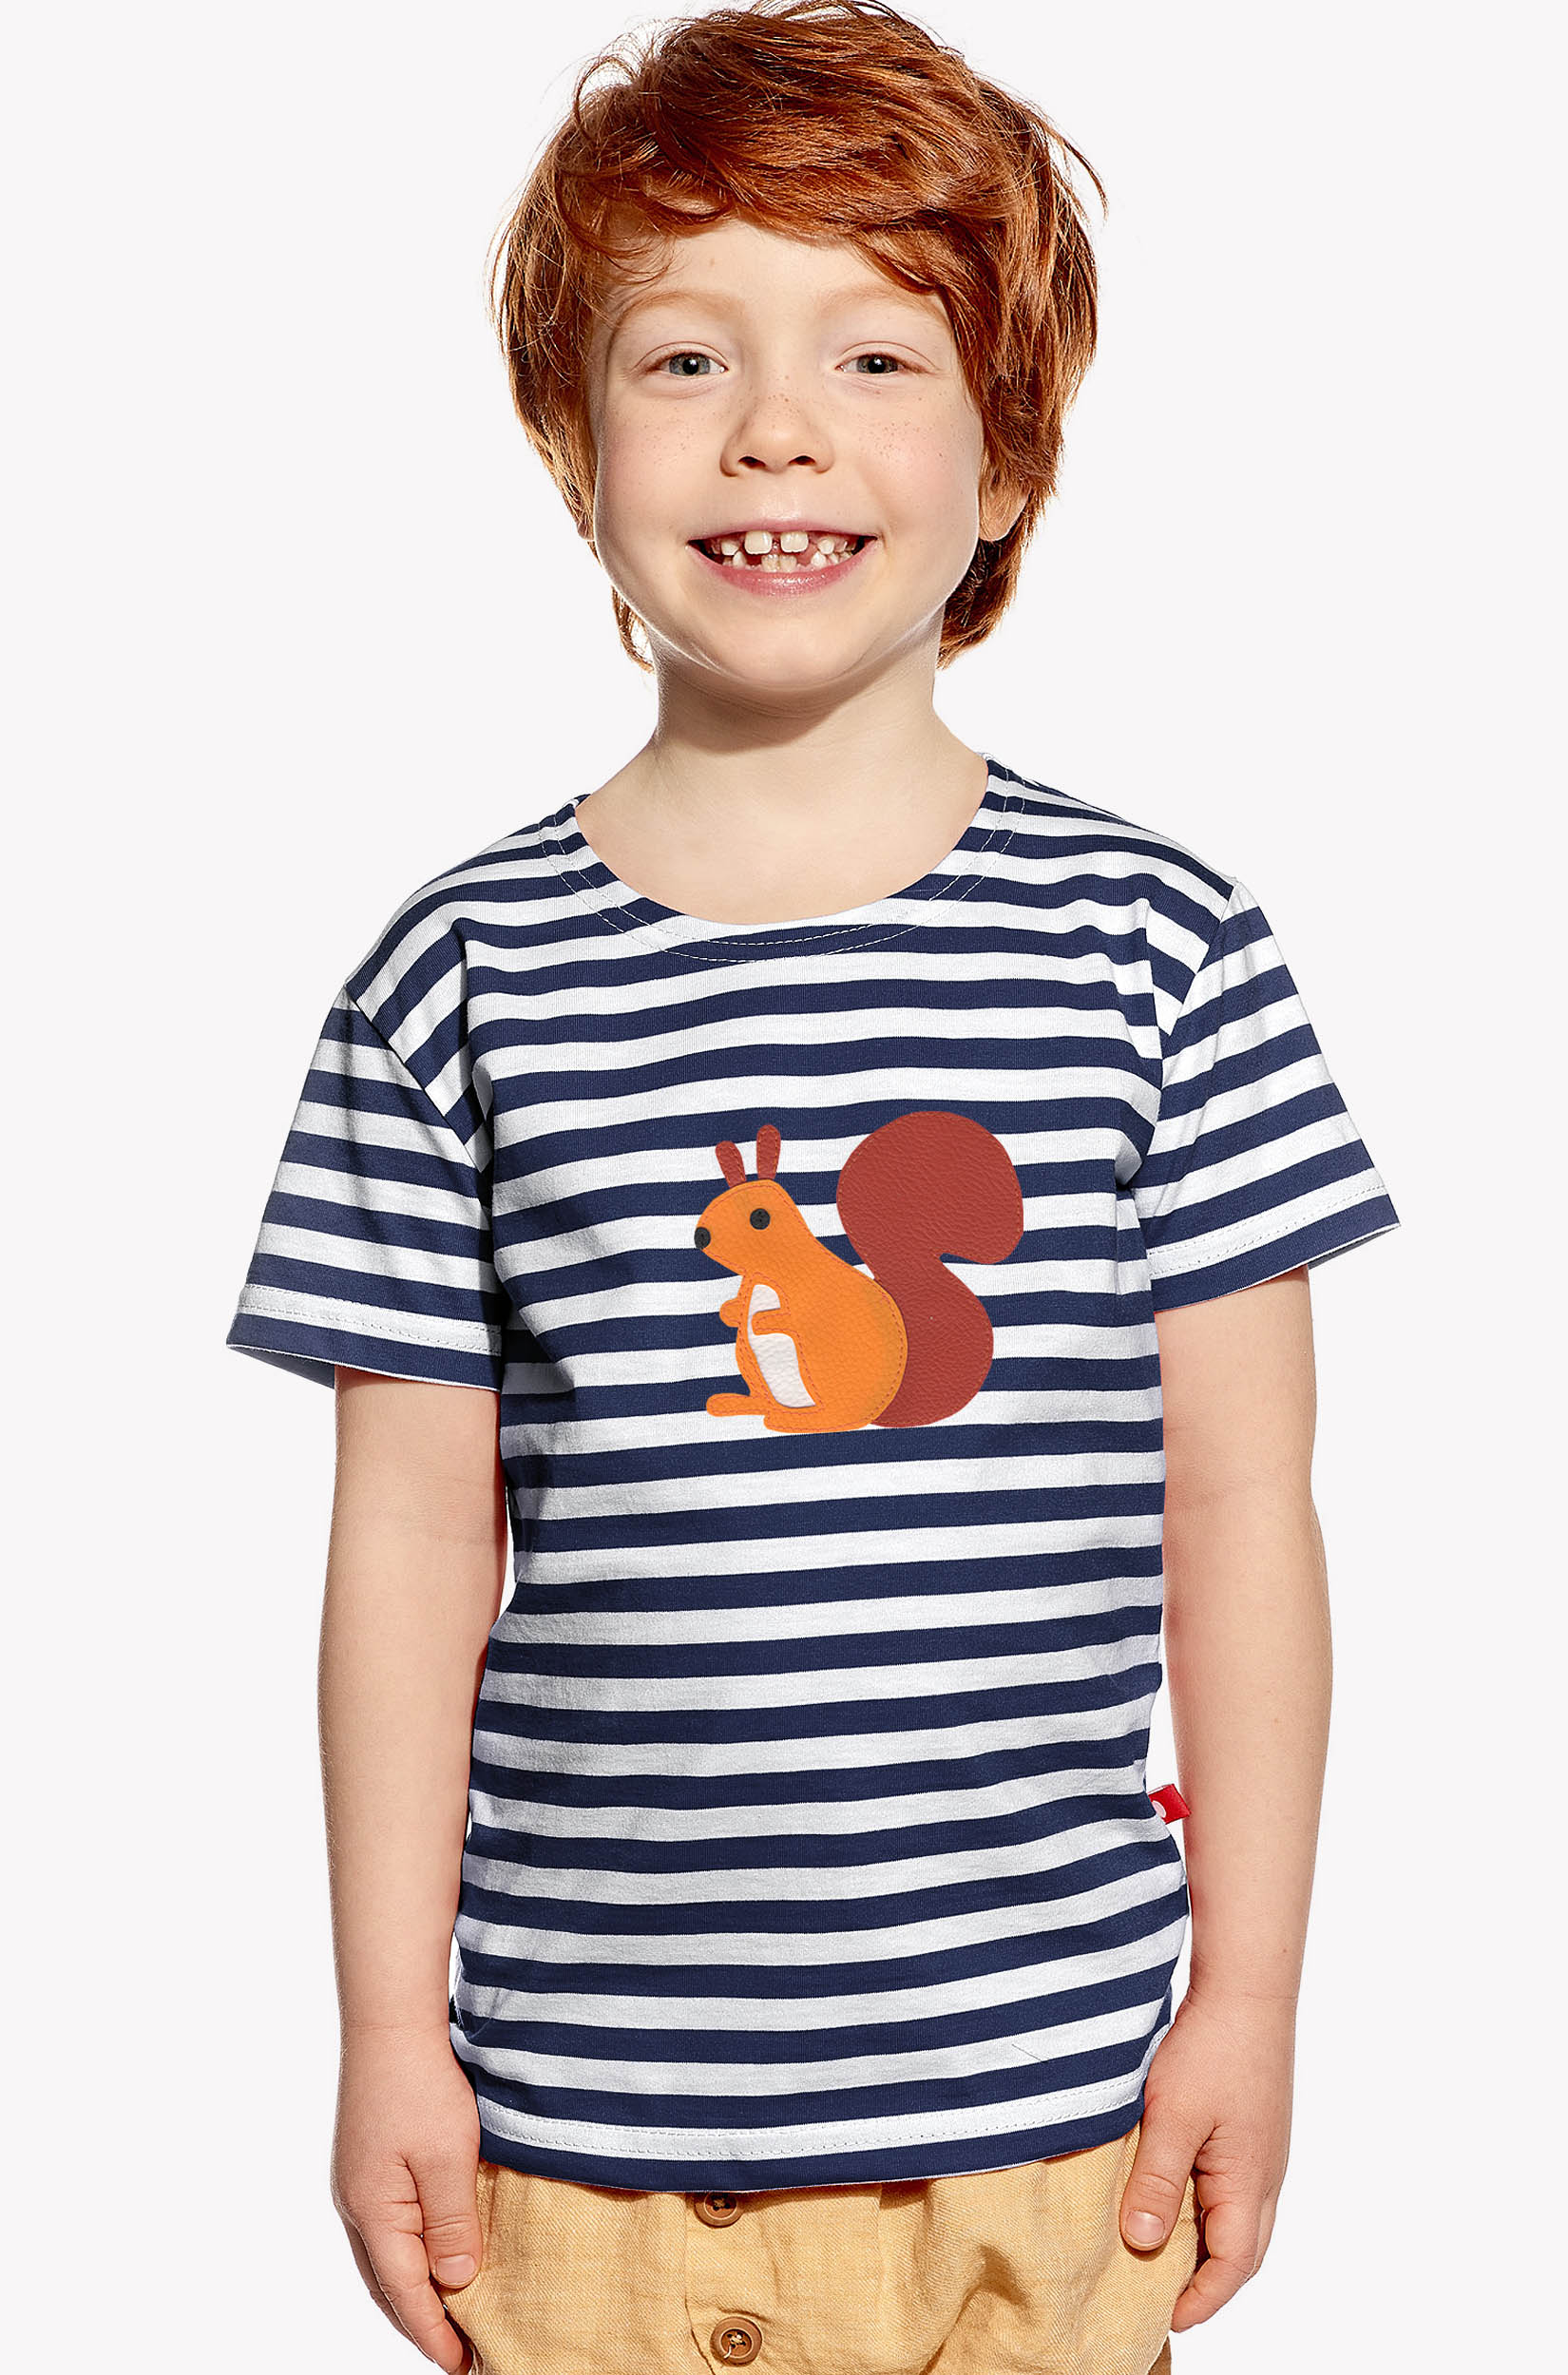 Shirt with squirrel